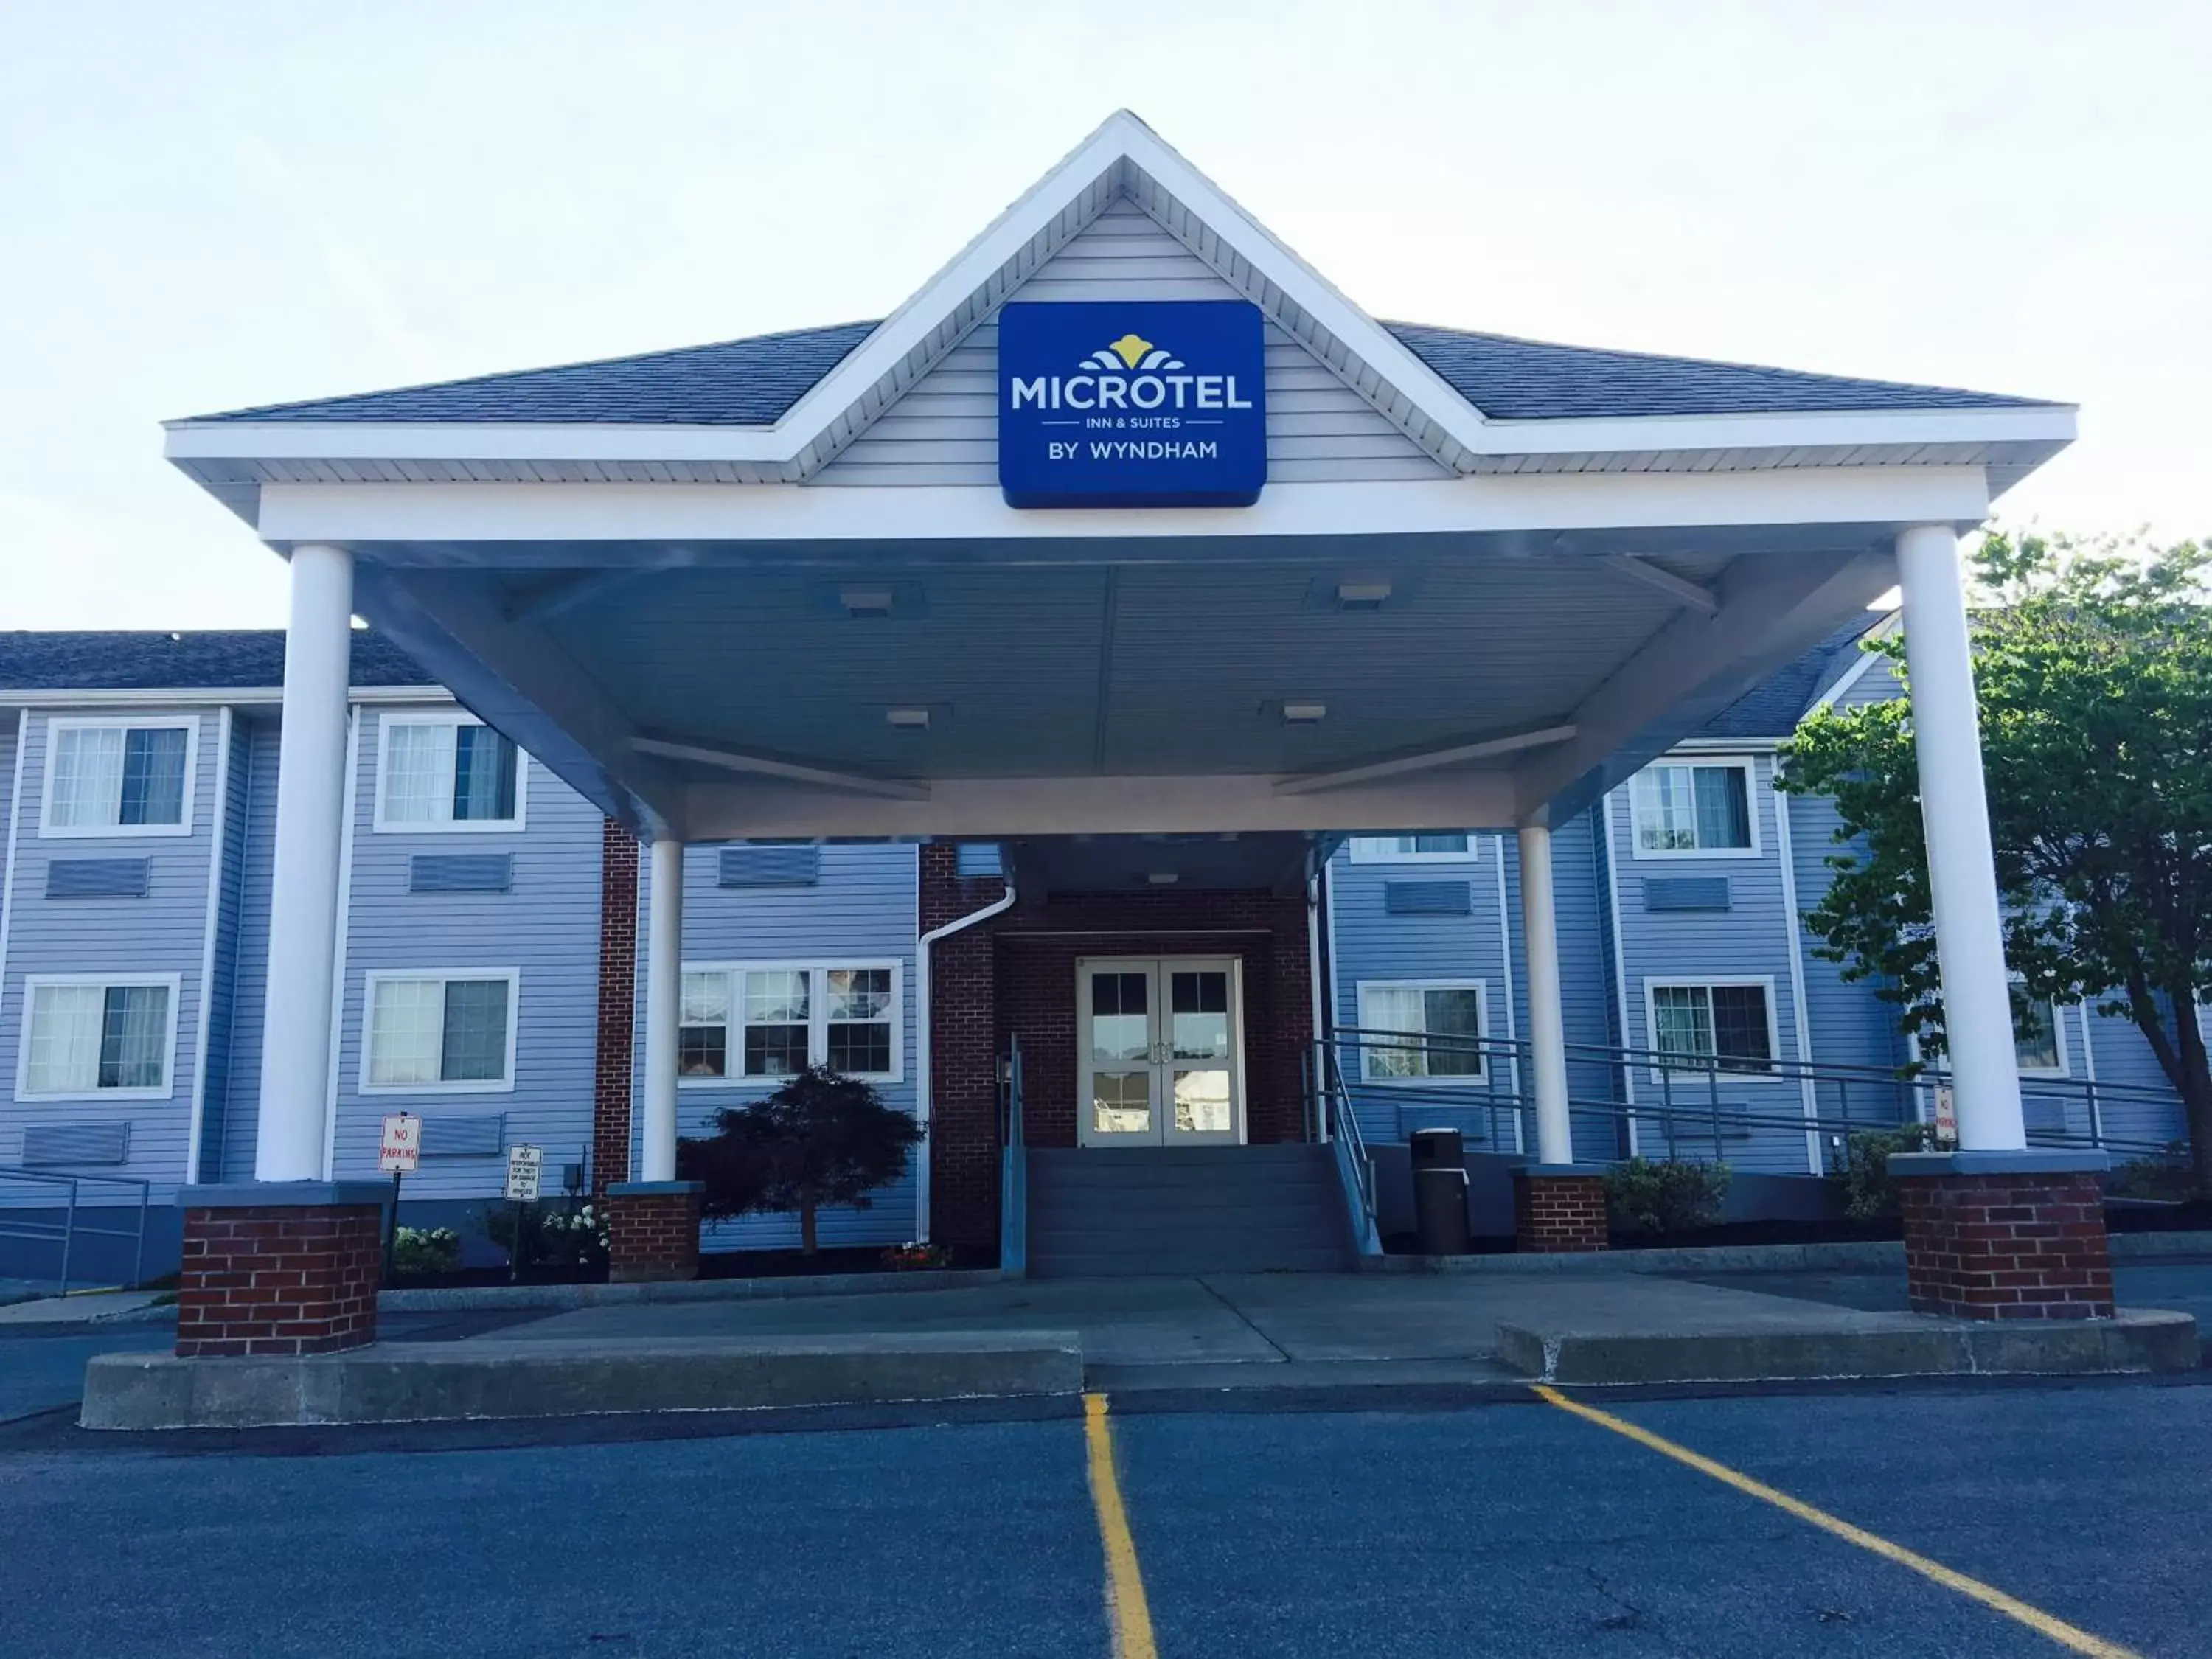 Facade/Entrance in Microtel Inn & Suites by Wyndham Syracuse Baldwinsville